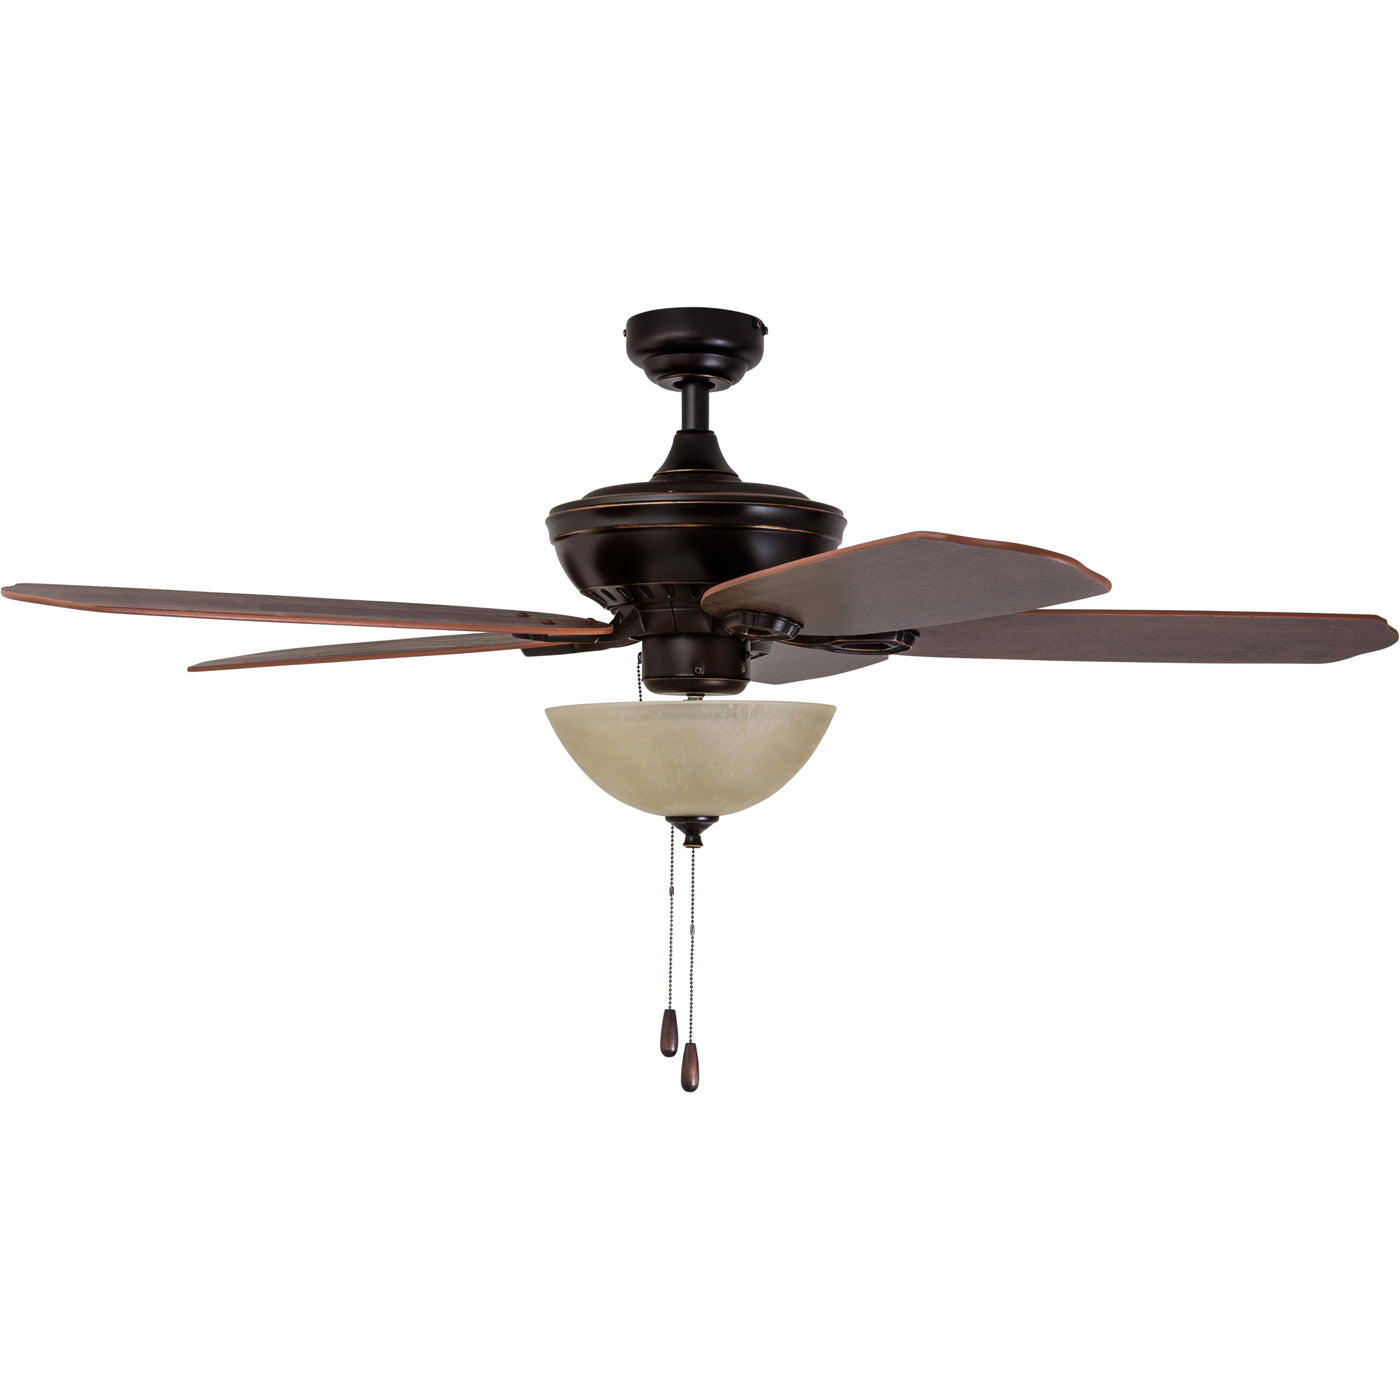 52 Inch Spring Hollow, Oil Rubbed Bronze, Pull Chain, Ceiling Fan